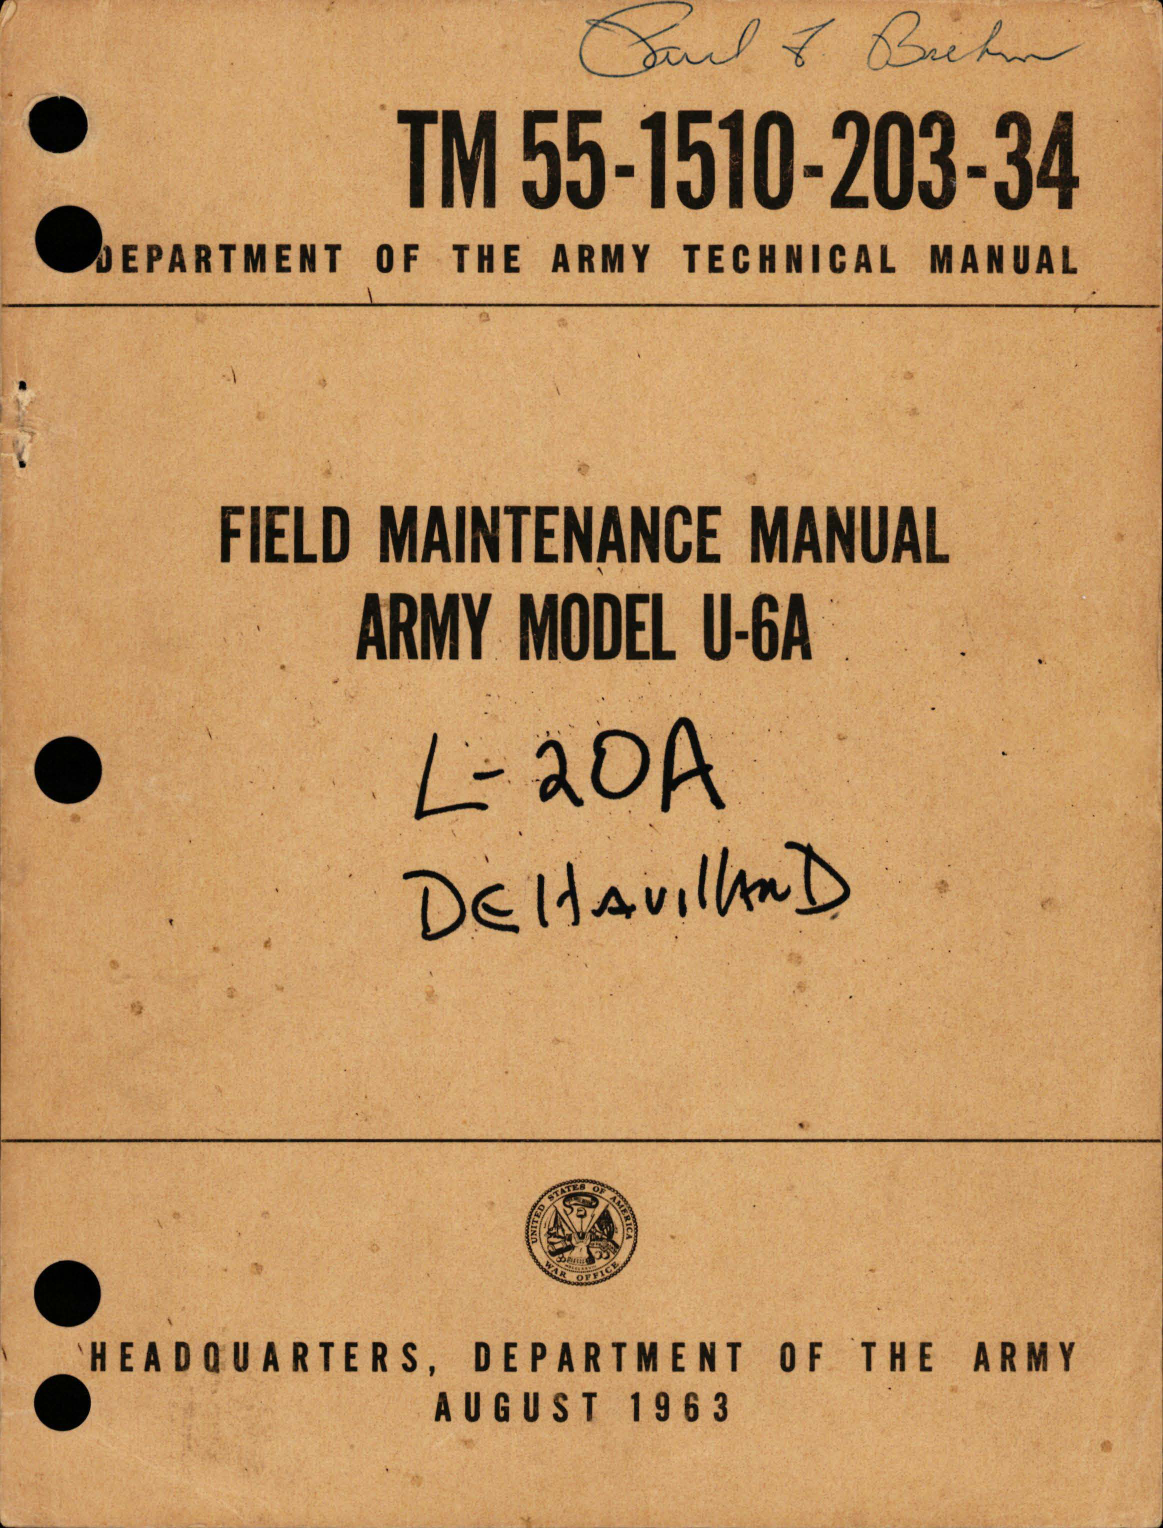 Sample page 1 from AirCorps Library document: Field Maintenance Manual for U-6A